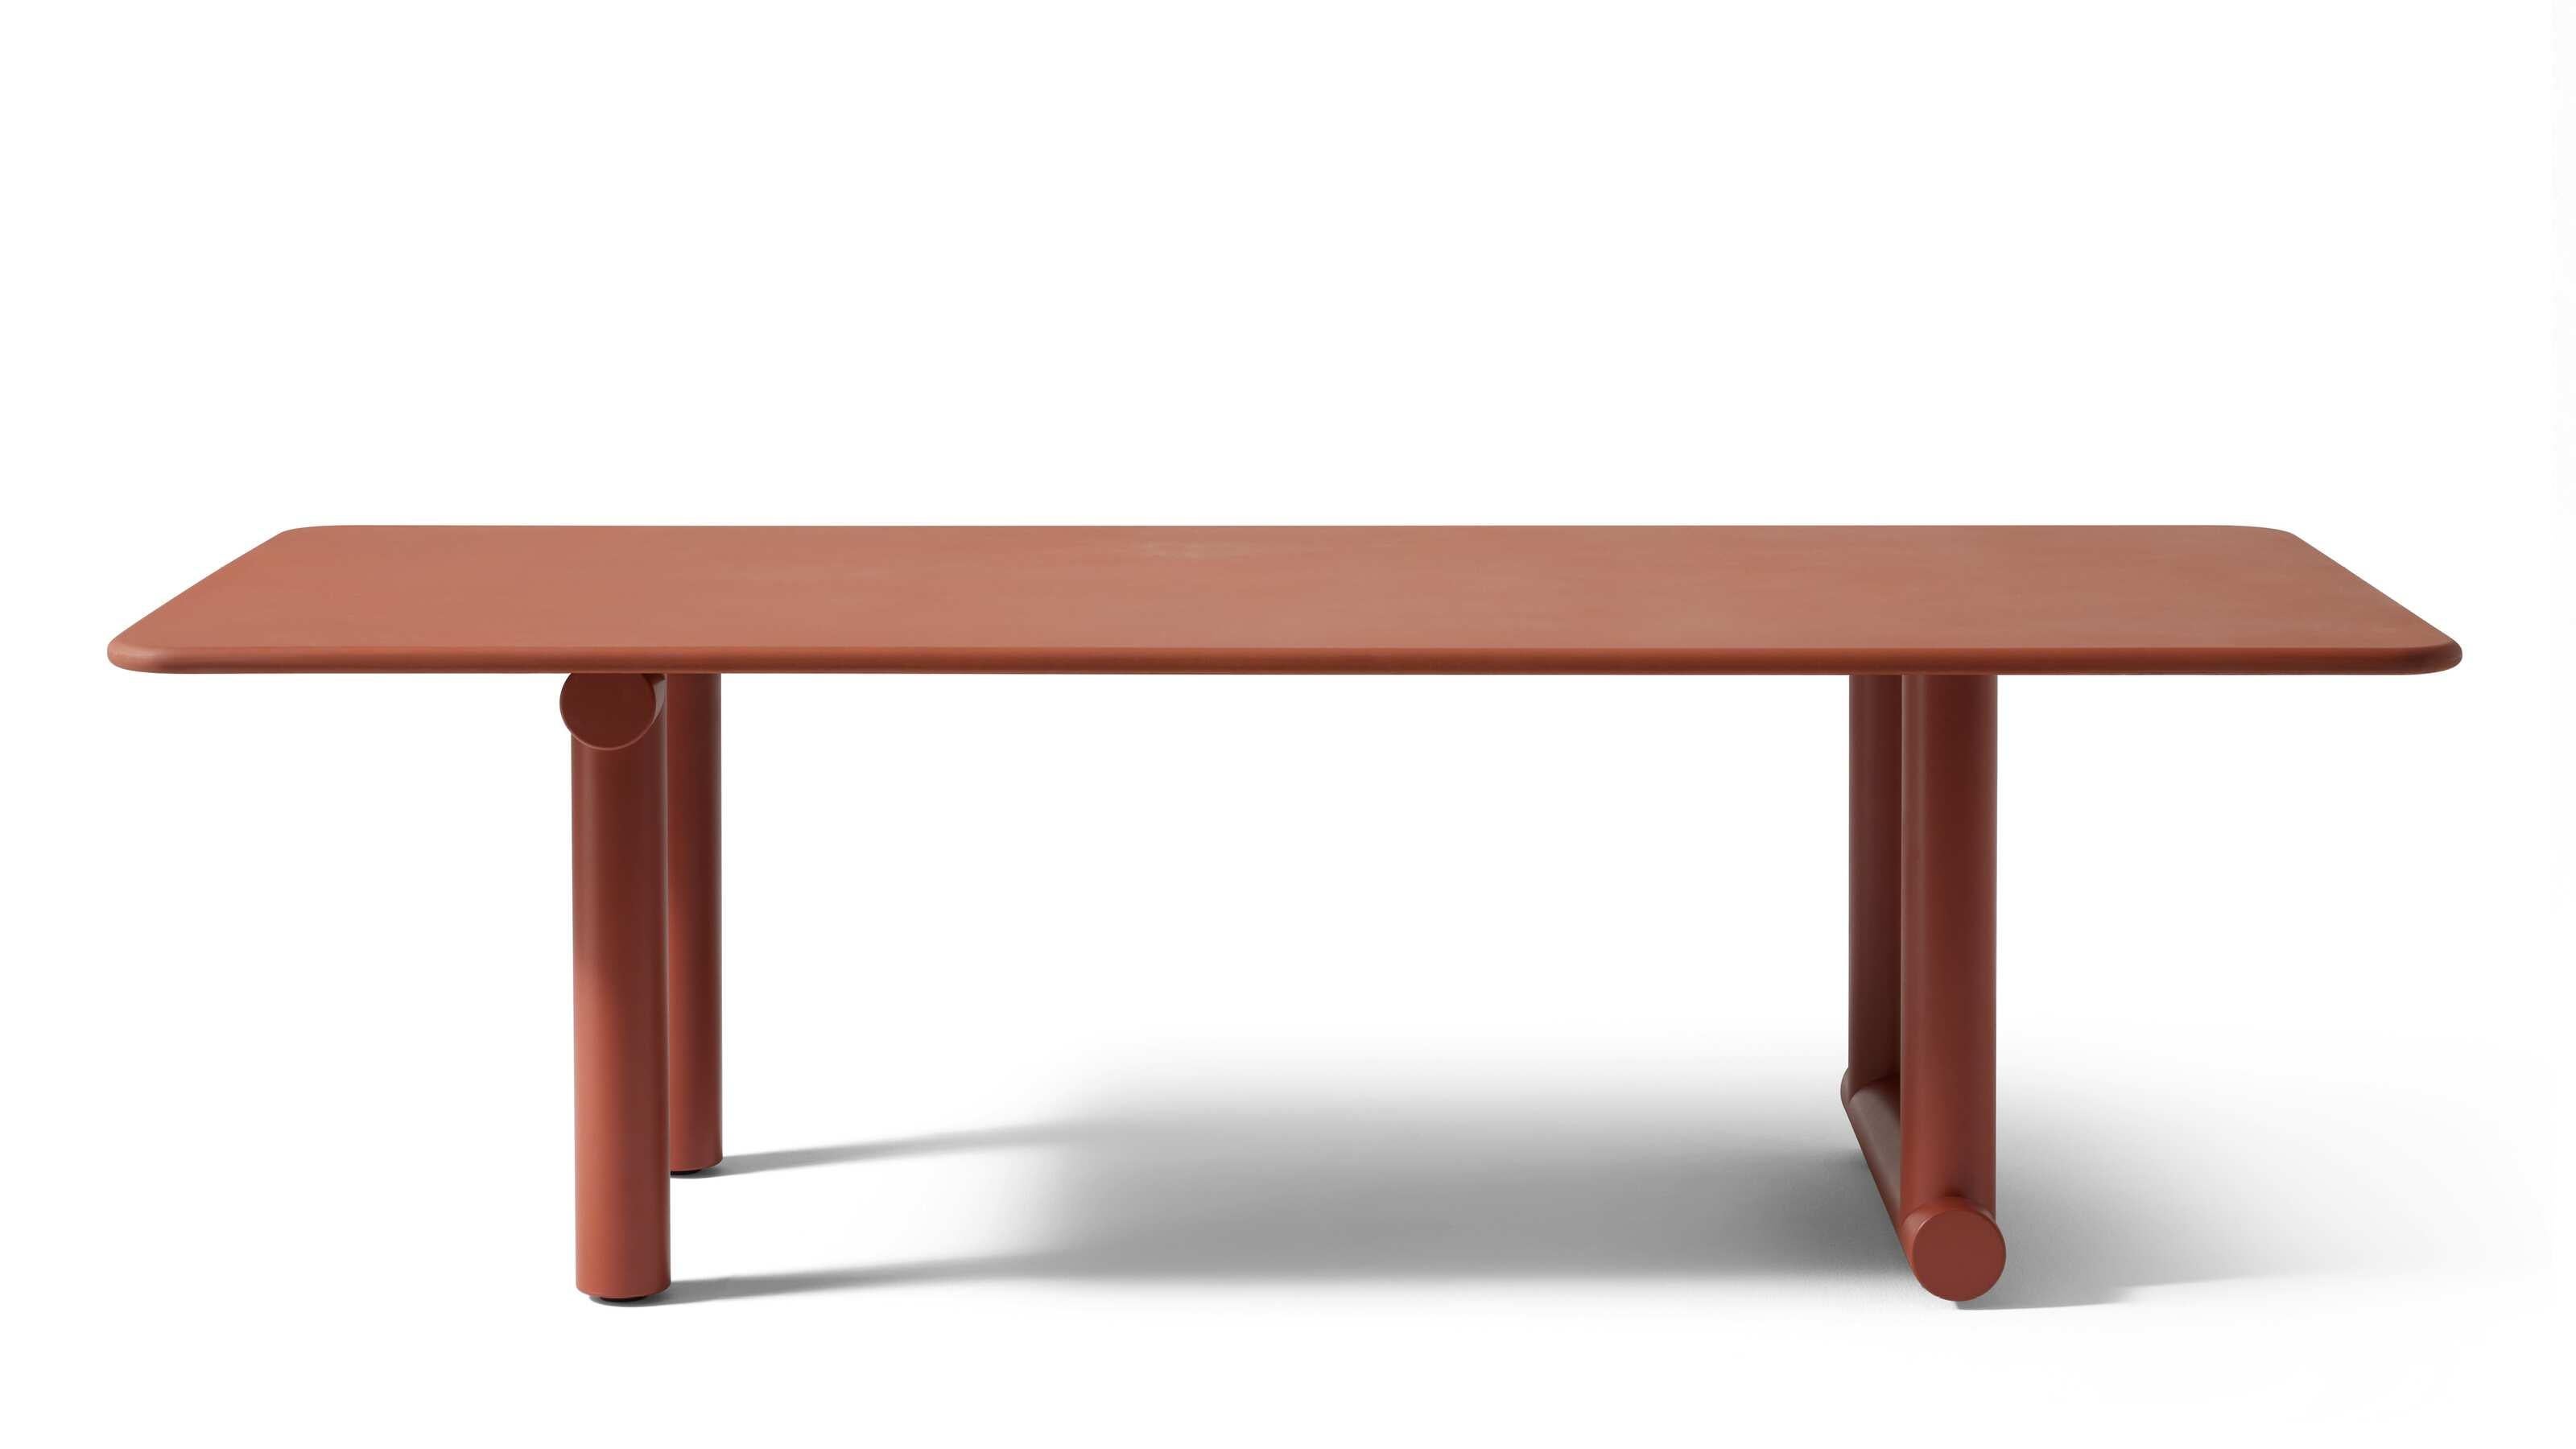 Trampoline Red Dining Table designed by Patricia Urquiola.
Manufactured by Cassina (Italy).

ARCHITECTURAL GEOMETRIES
With the Trampoline Dining Table, Patricia Urquiola pays tribute to the tubular system that, during the early 1900s, played a part